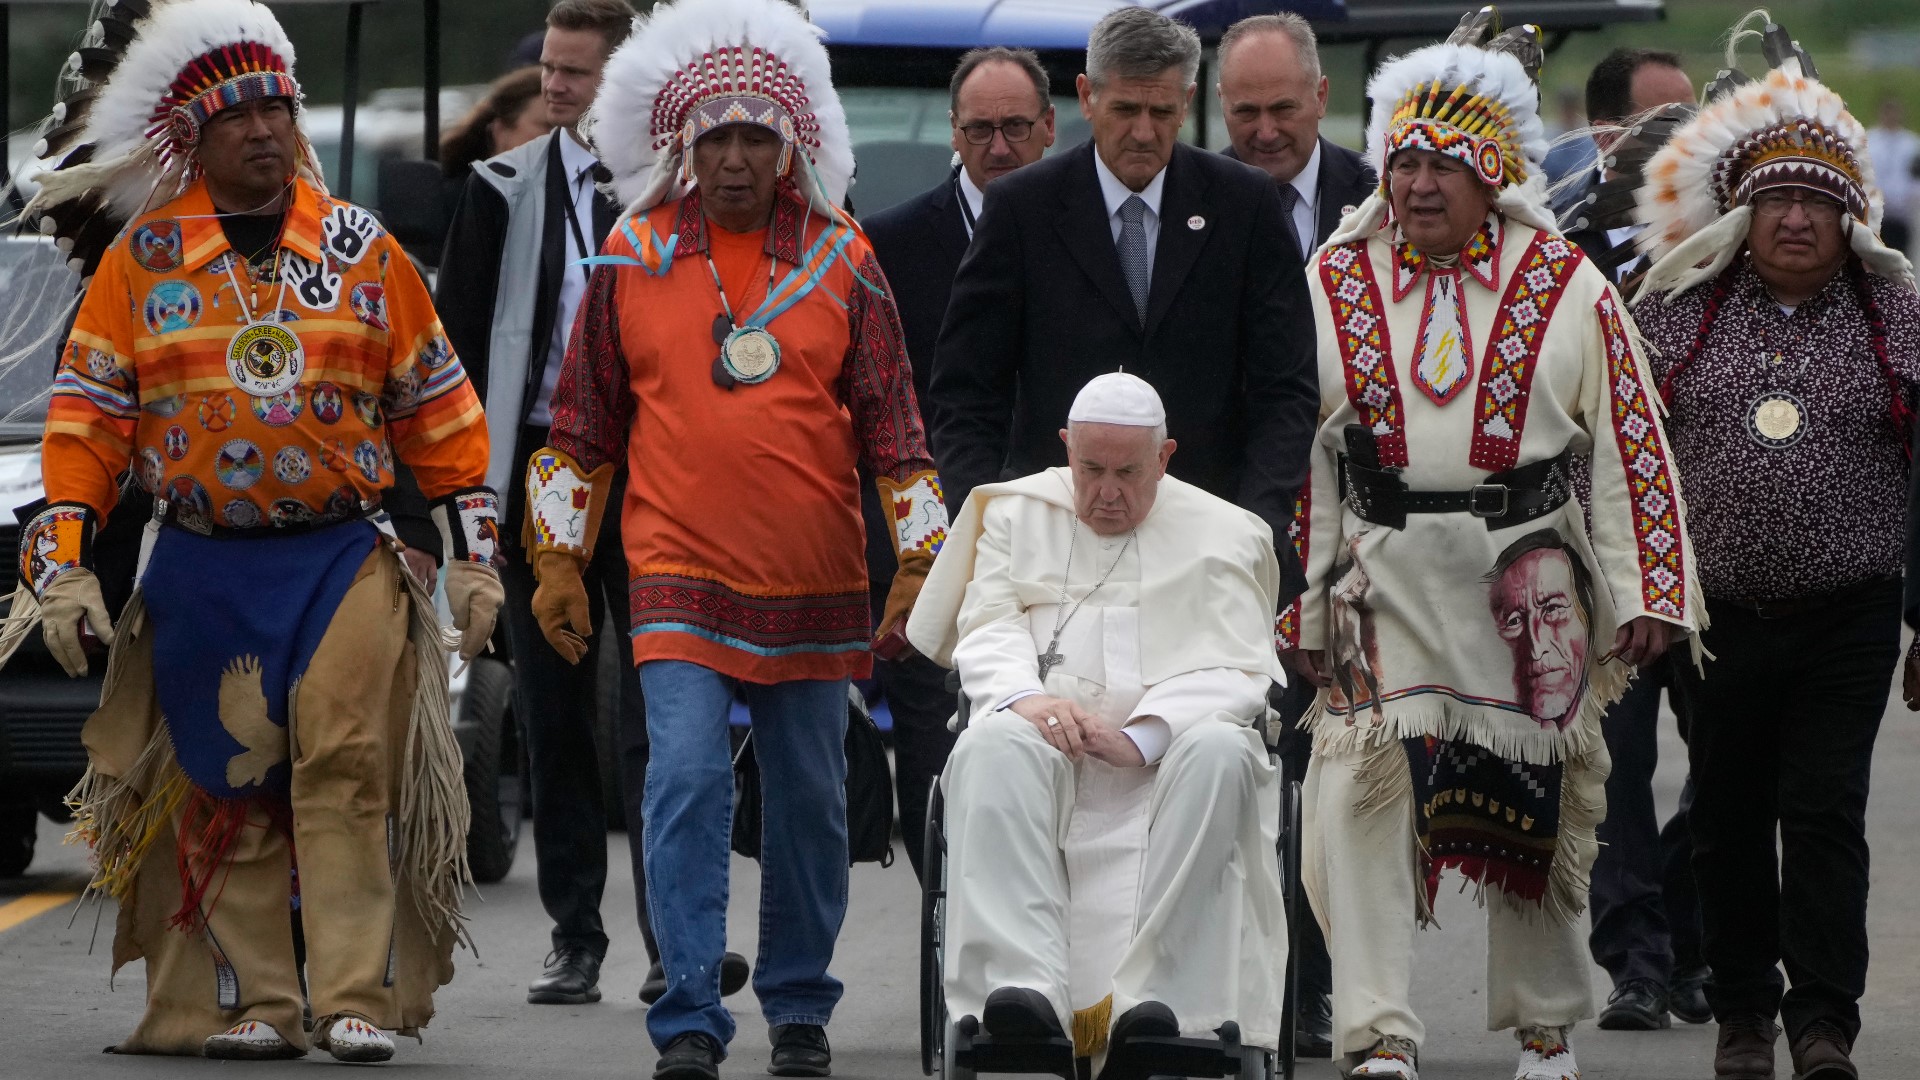 The trip is a key step in the Catholic Church’s efforts to reconcile with Indigenous communities and help them heal from generations of trauma.